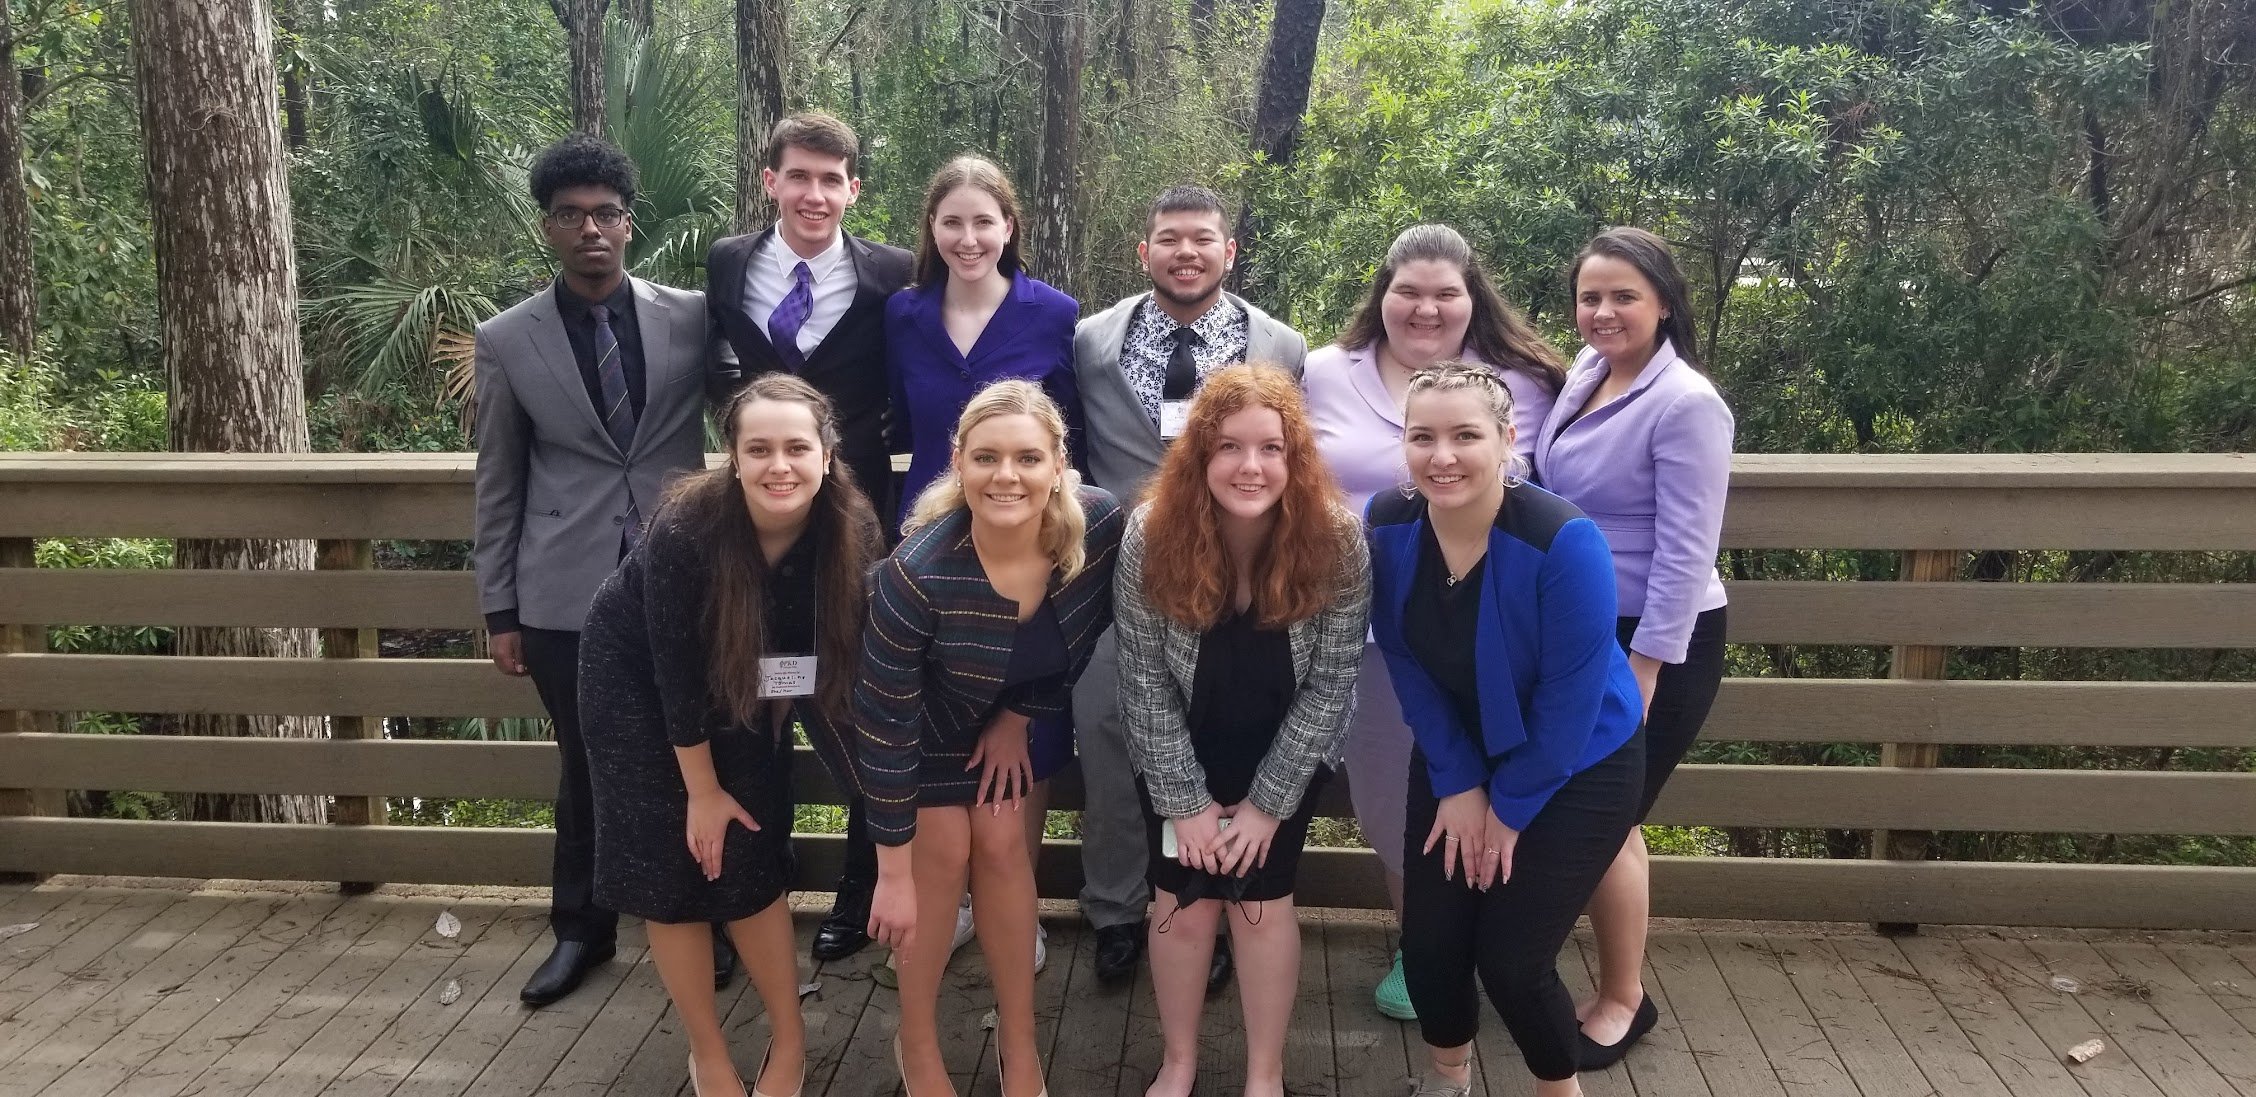 Minnesota State University speech and debate team gathered together posing for a group photo outside on a bridge